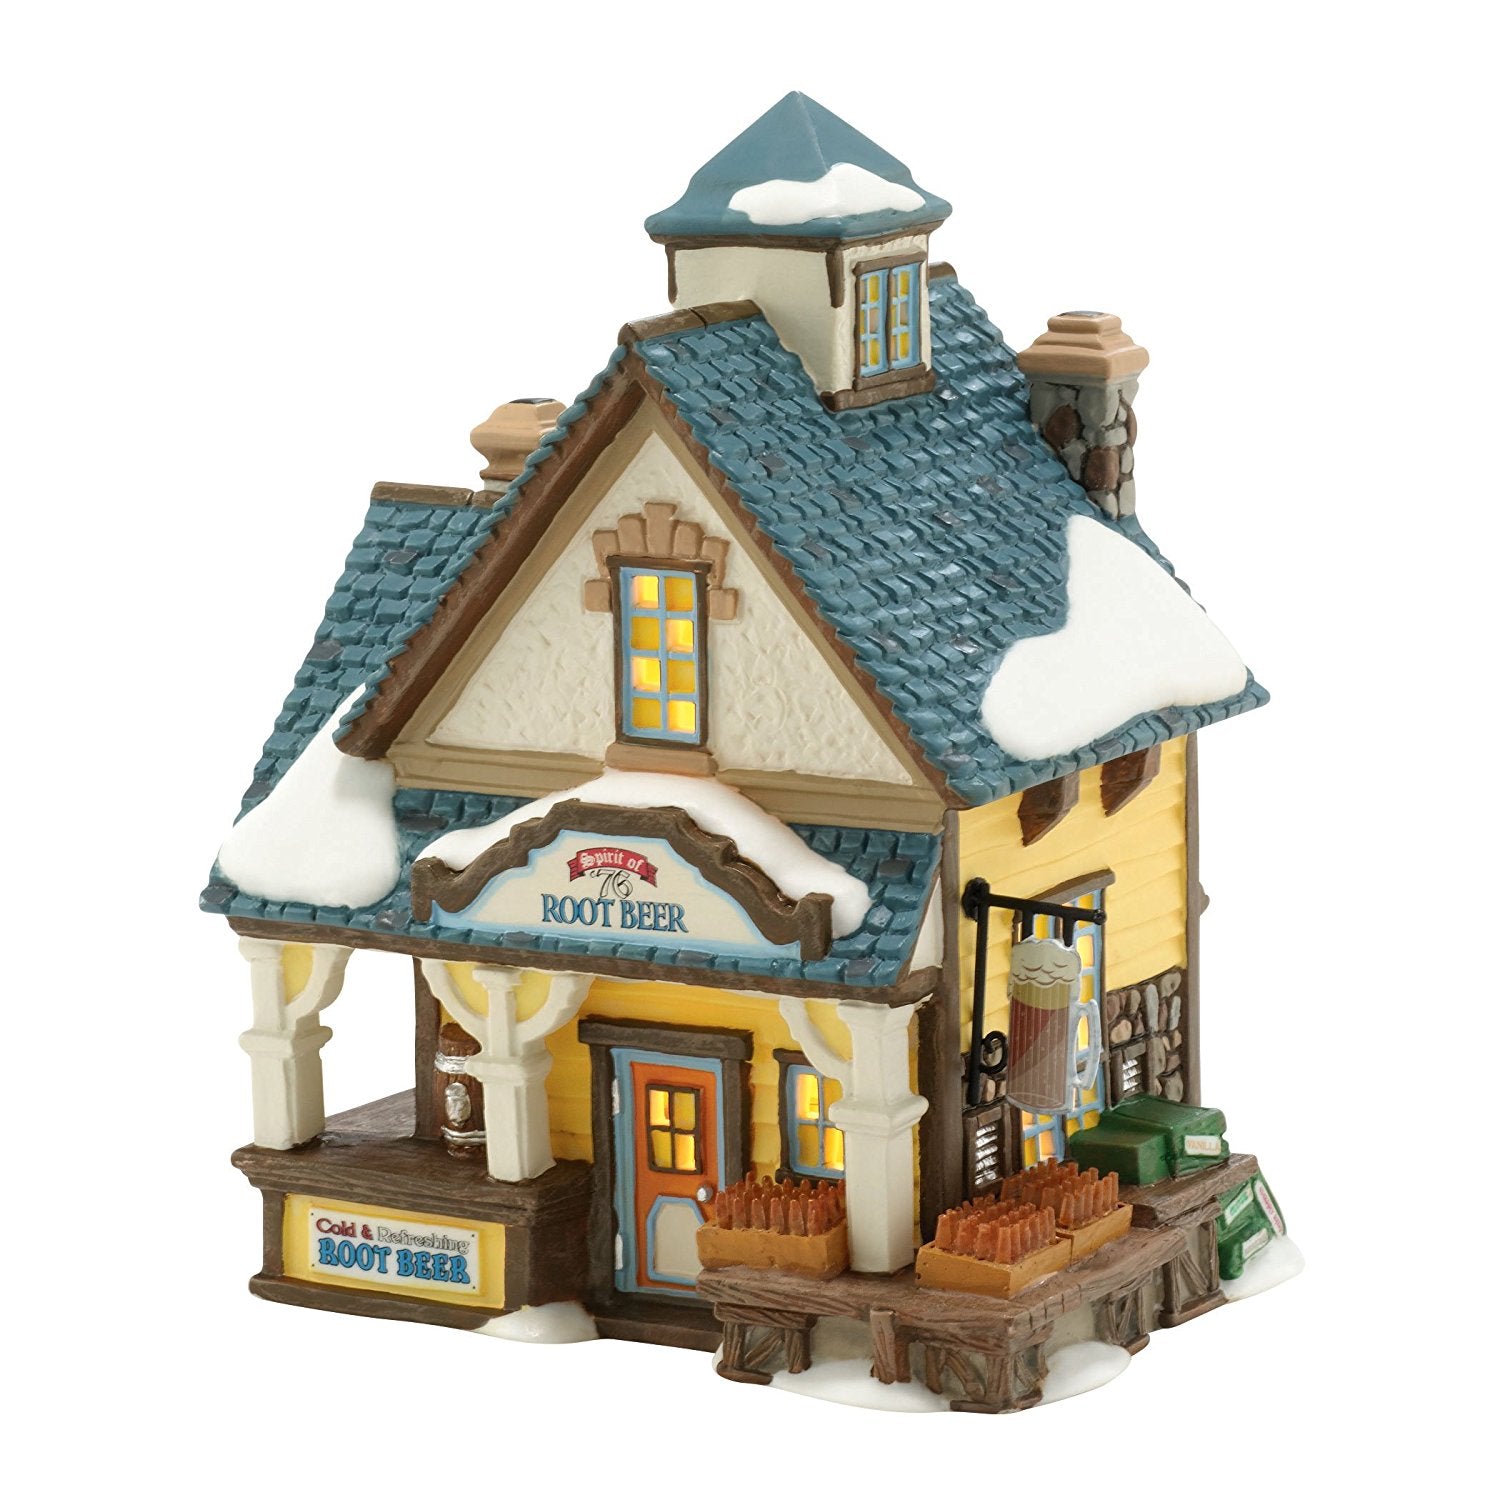 Department 56 New England Village Spirit of '76 Root Beer Lit House, 6.5 inch